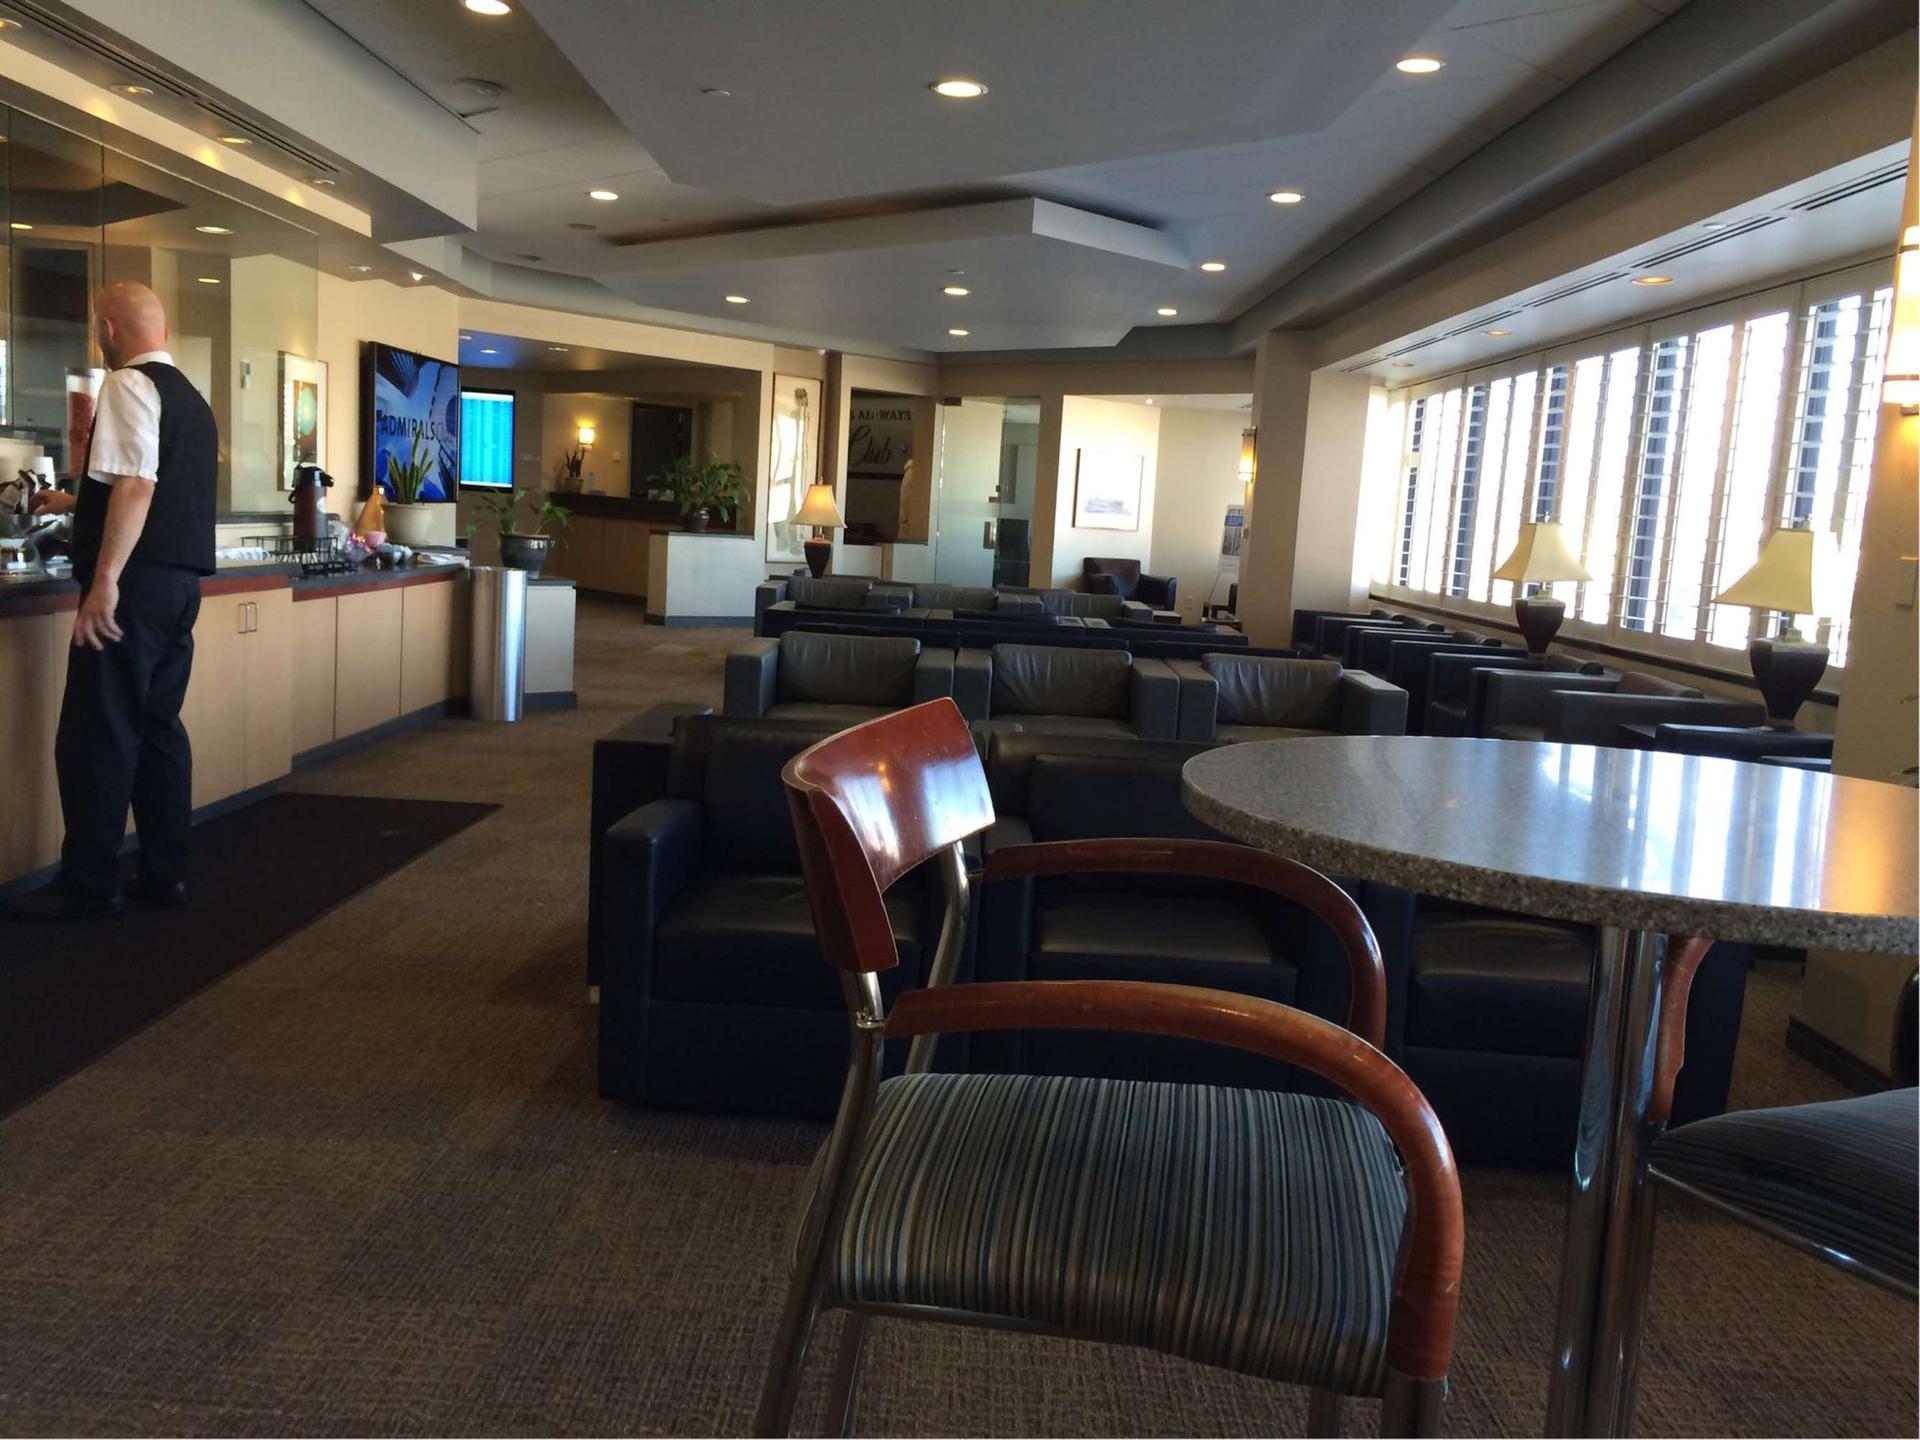 American Airlines Admirals Club image 5 of 12